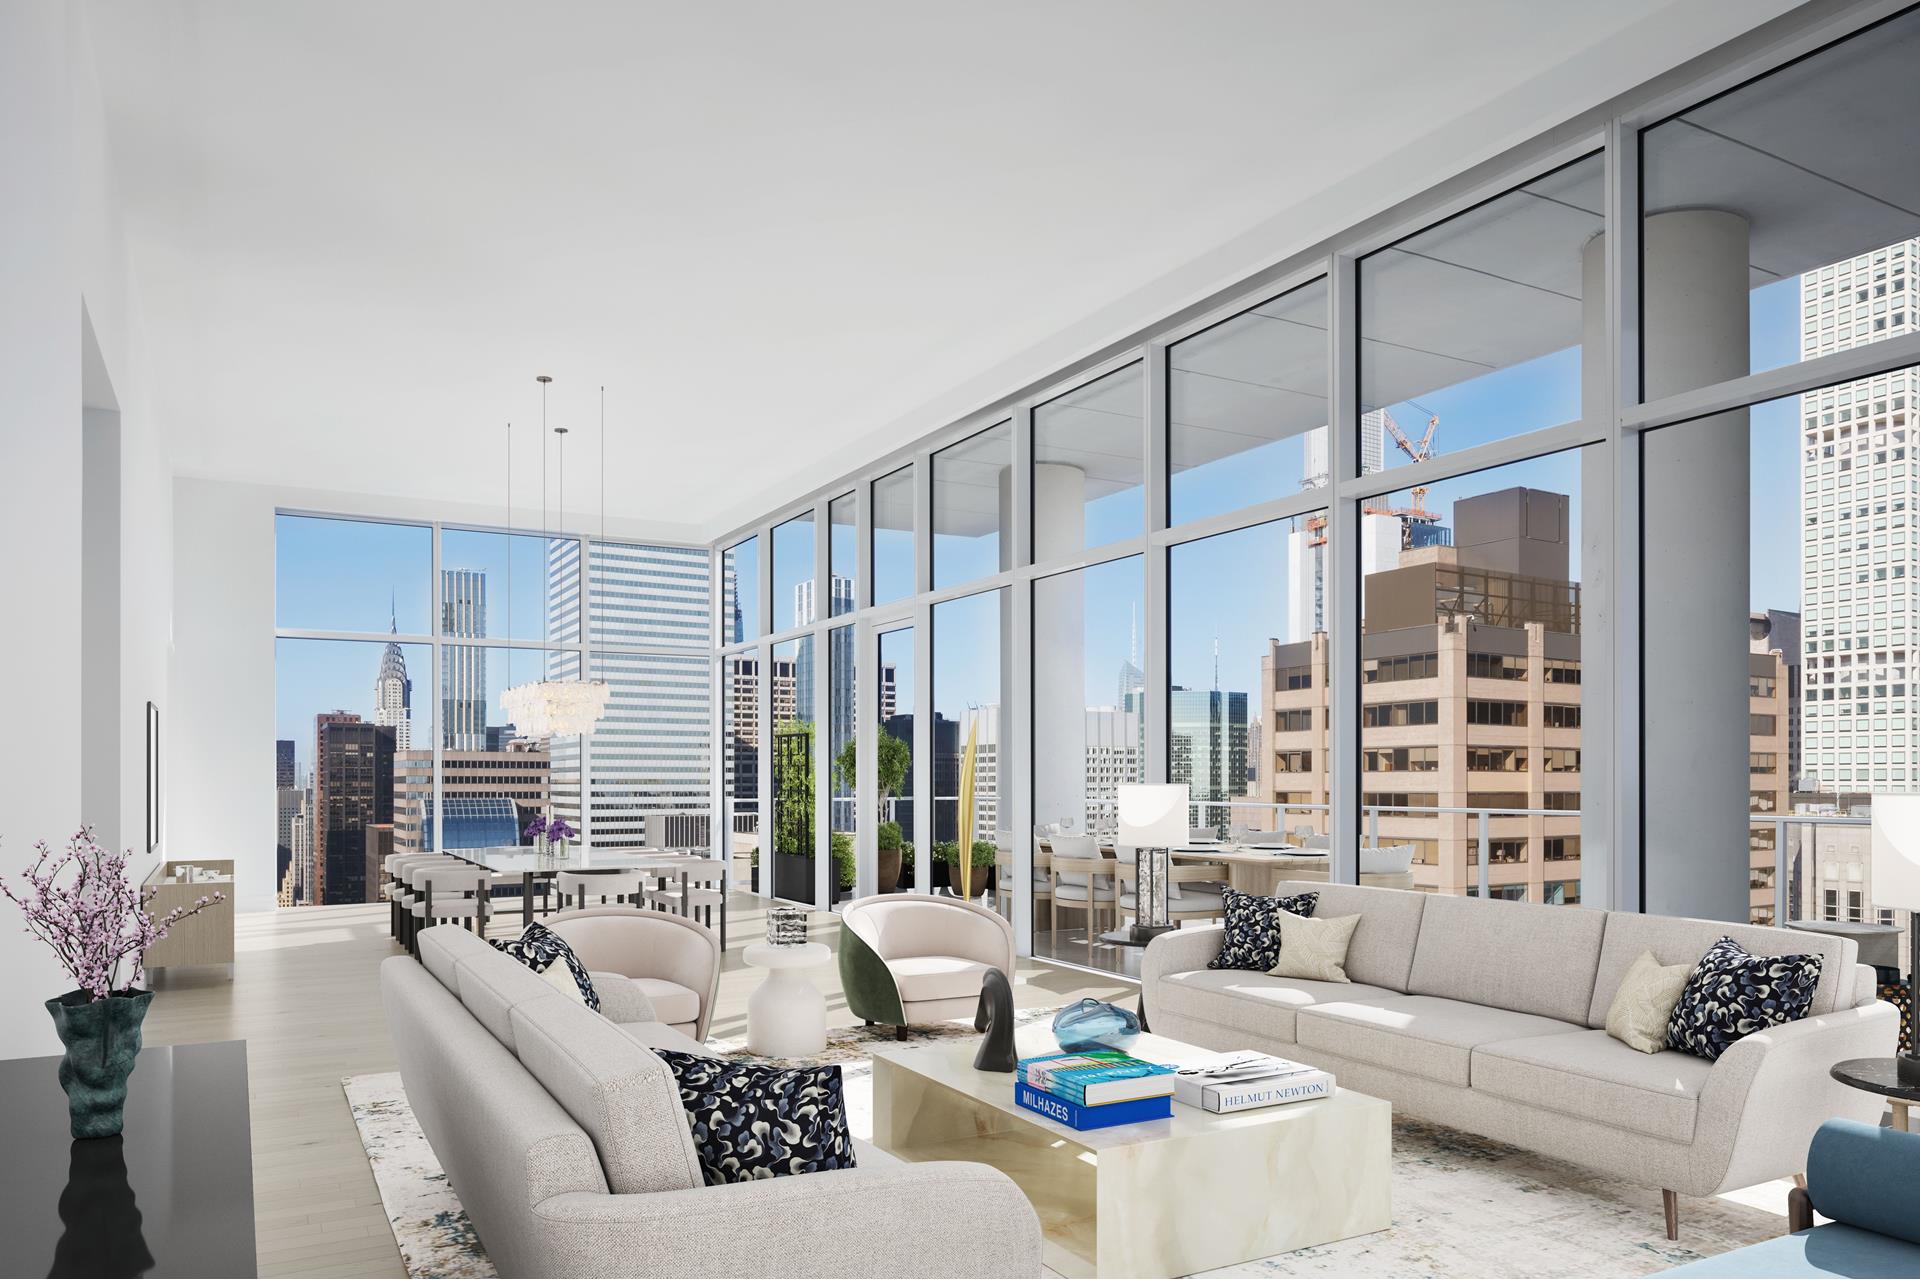 200 East 59th Street Ph33, Sutton Place, Midtown East, NYC - 3 Bedrooms  
4.5 Bathrooms  
7 Rooms - 